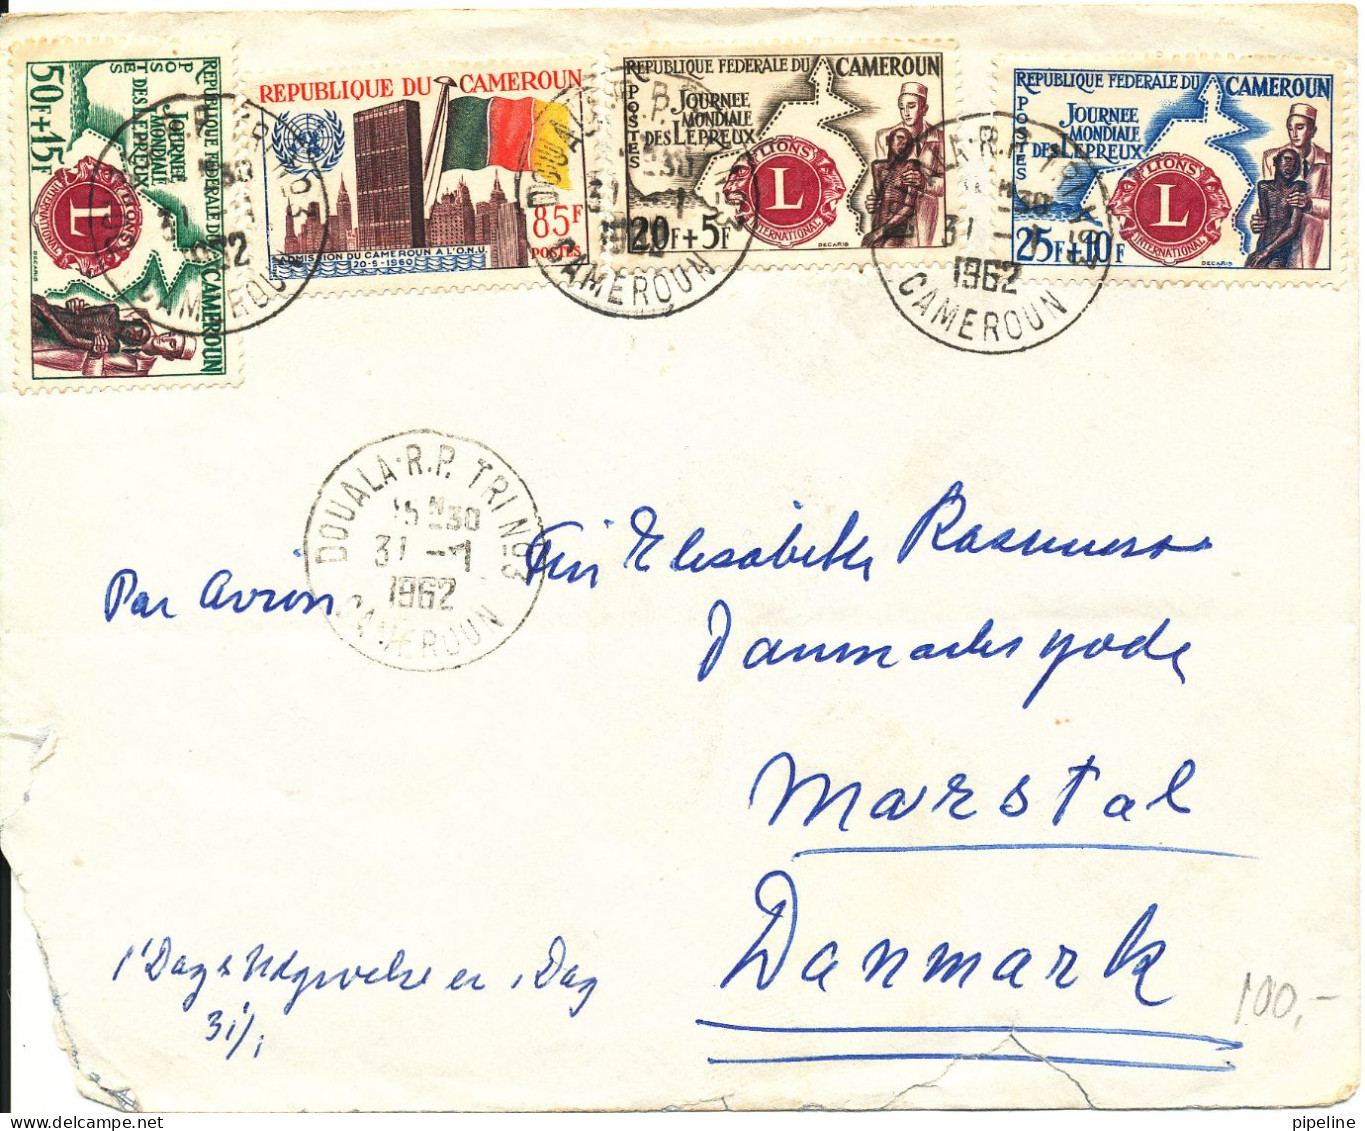 Cameroun Cover/FDC Sent To Denmark 31-1-1962 Single Franked Cover Damaged By Opening - Storia Postale